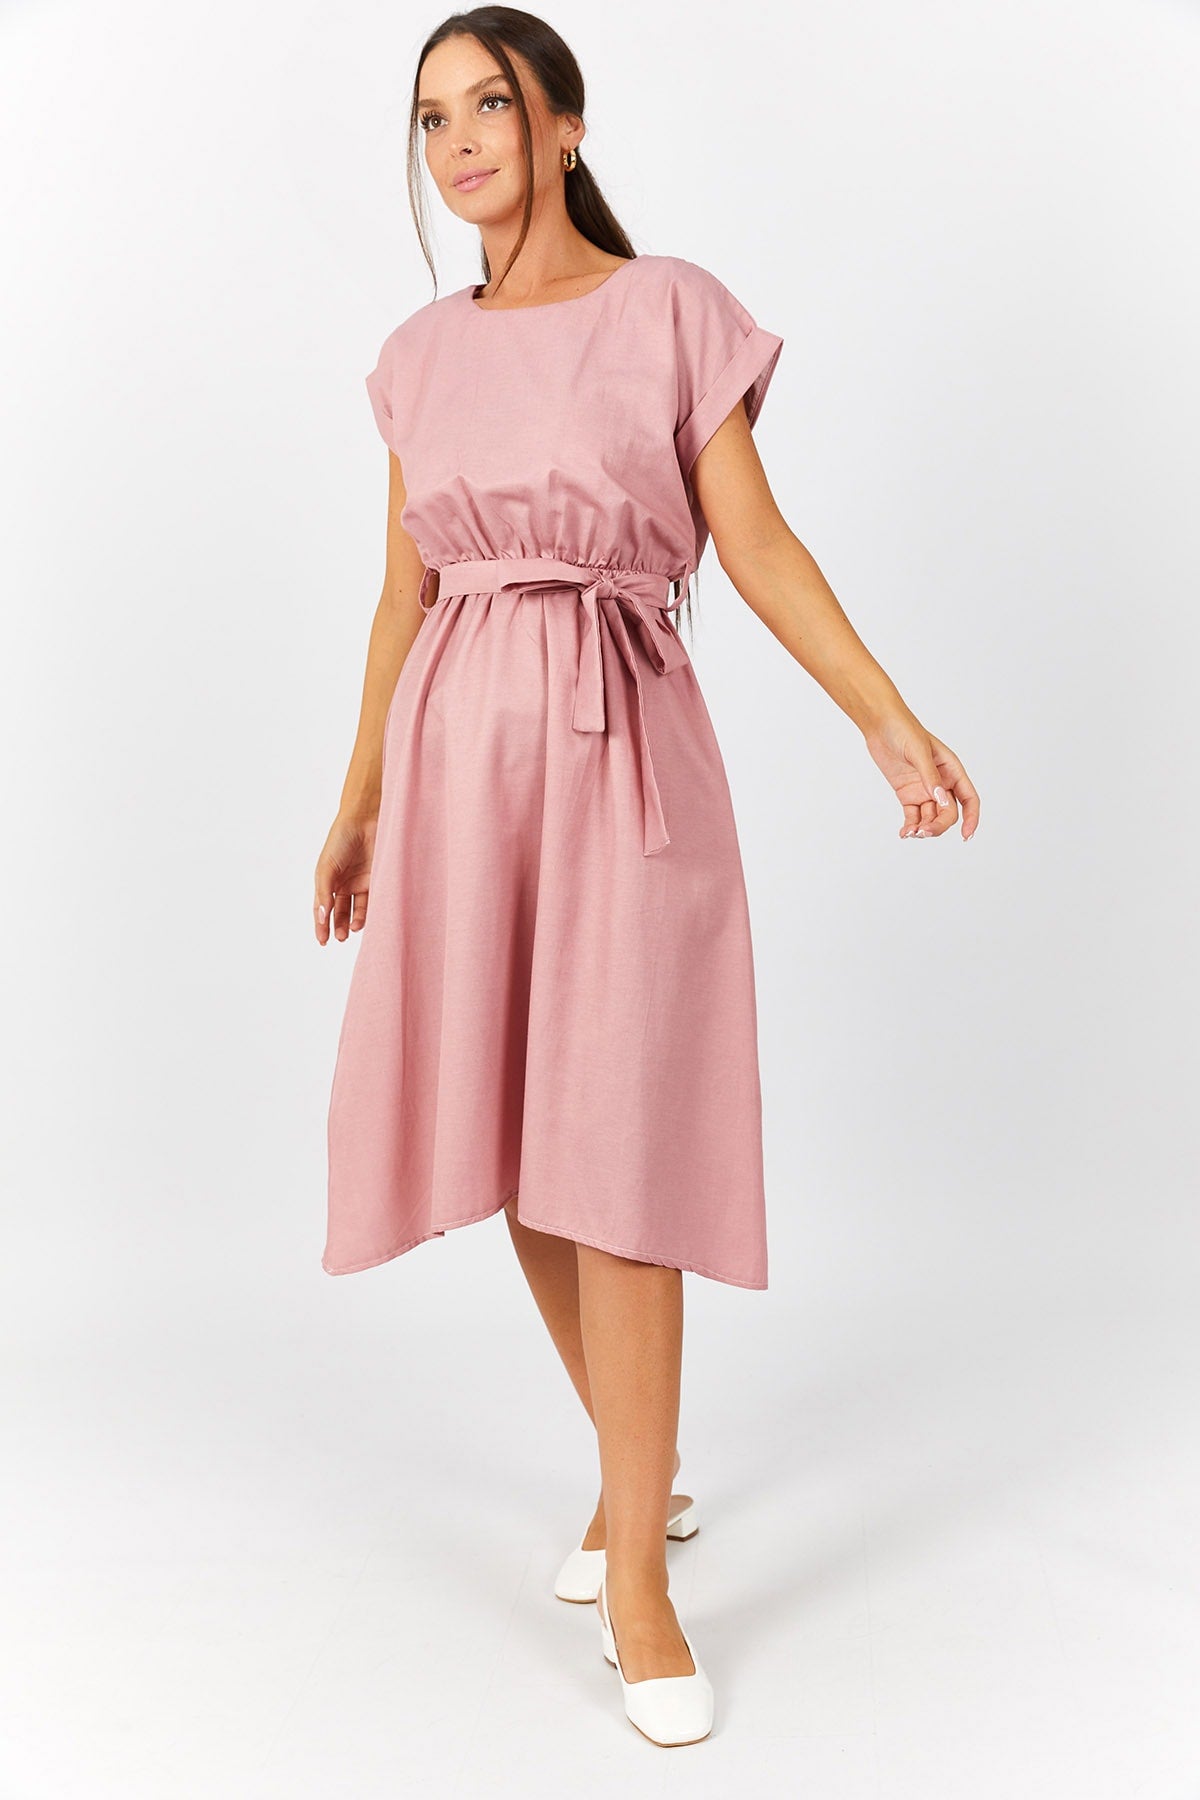 WOMEN'S ROSE DRY WALL WALL TIPTED DRESS ARM-221139